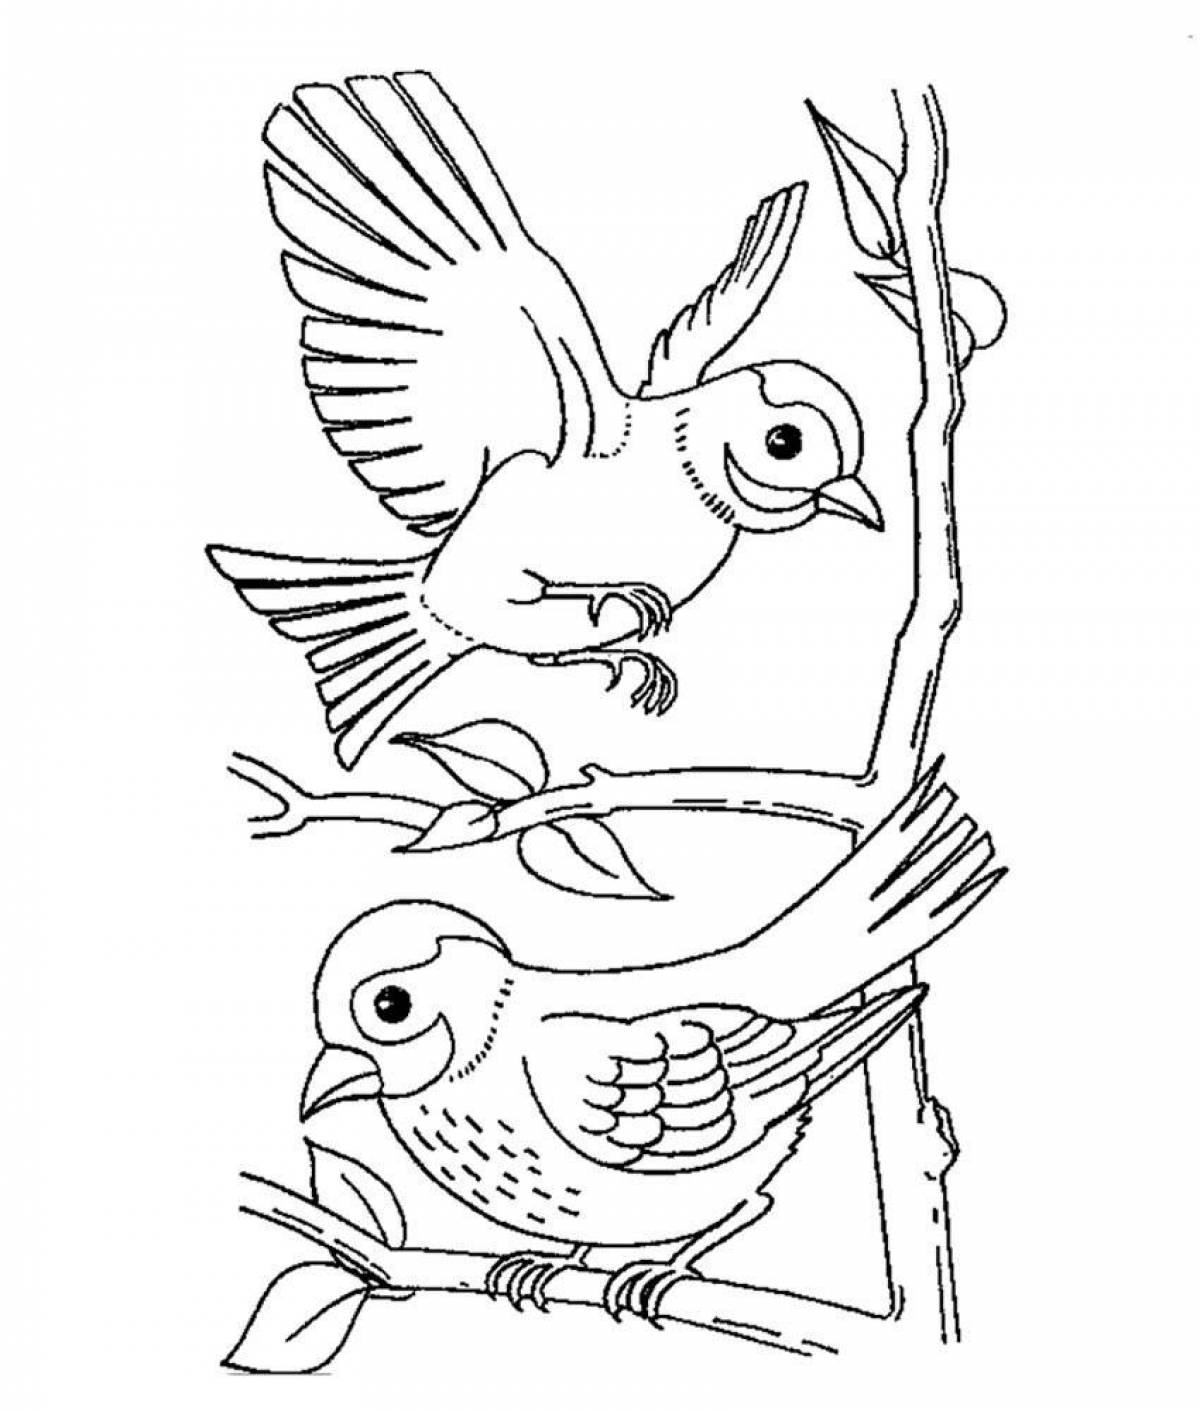 Shiny sparrow coloring book for kids